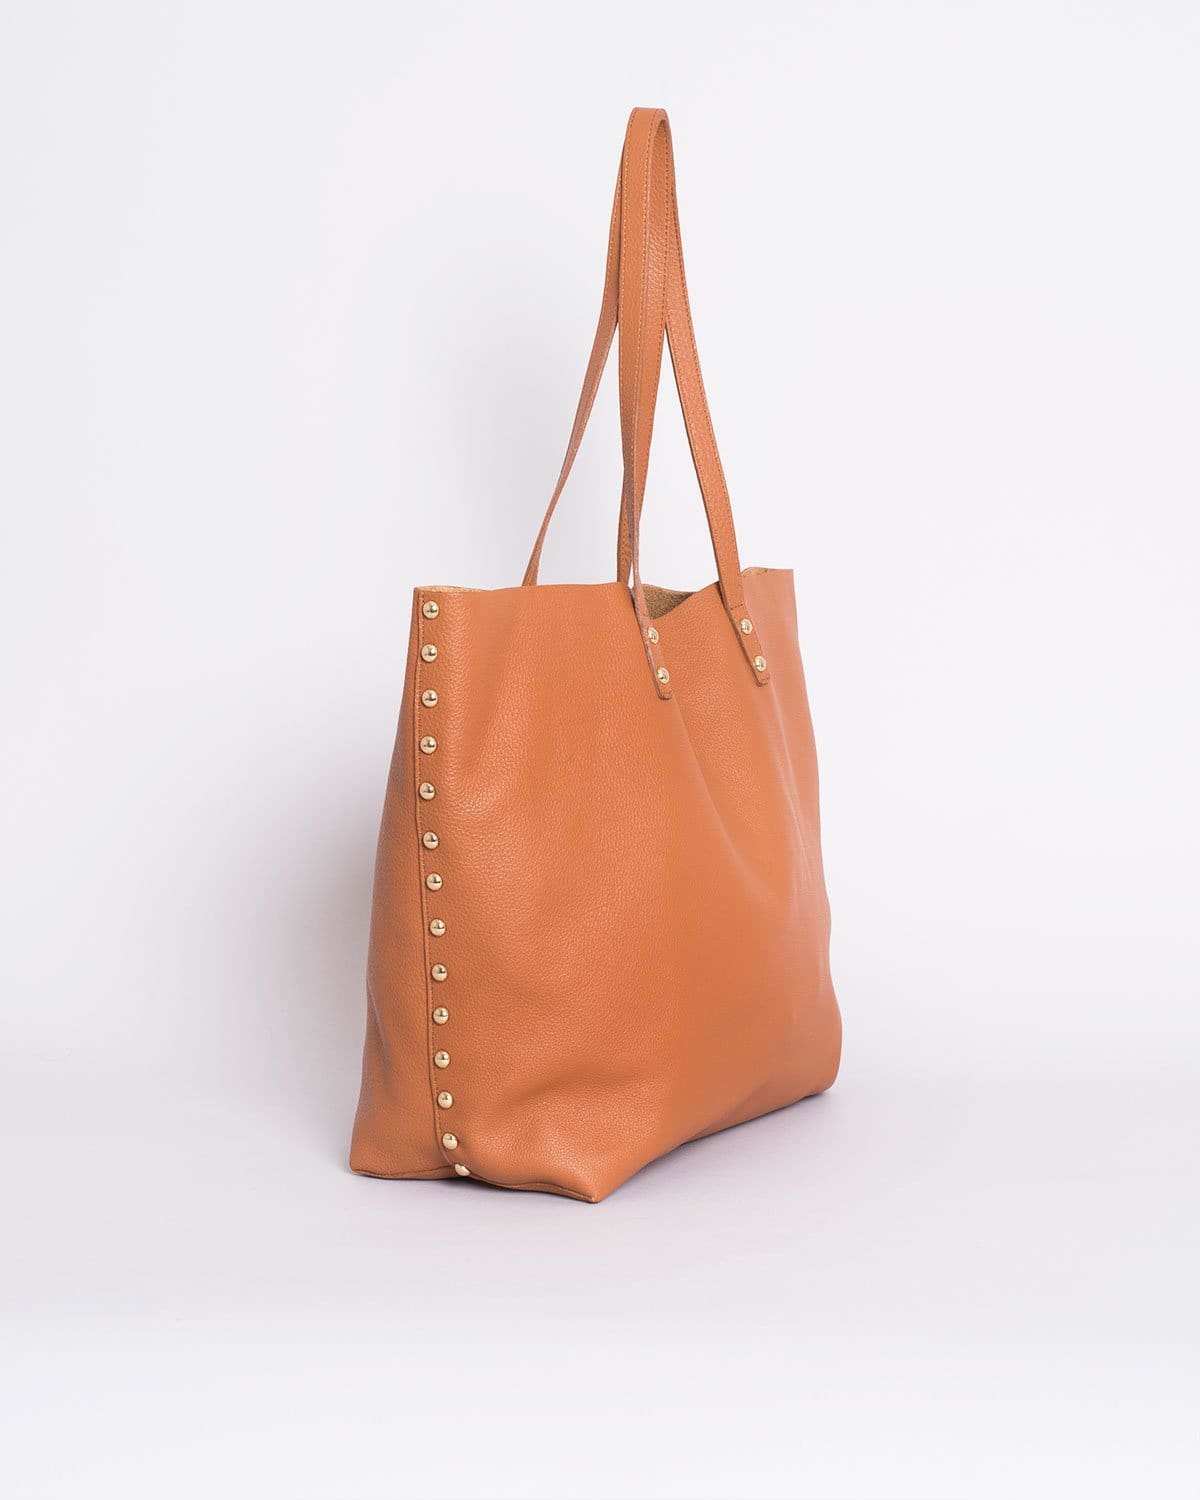 Studded Slouchy Tote - Caramel Bags | Pietro NYC